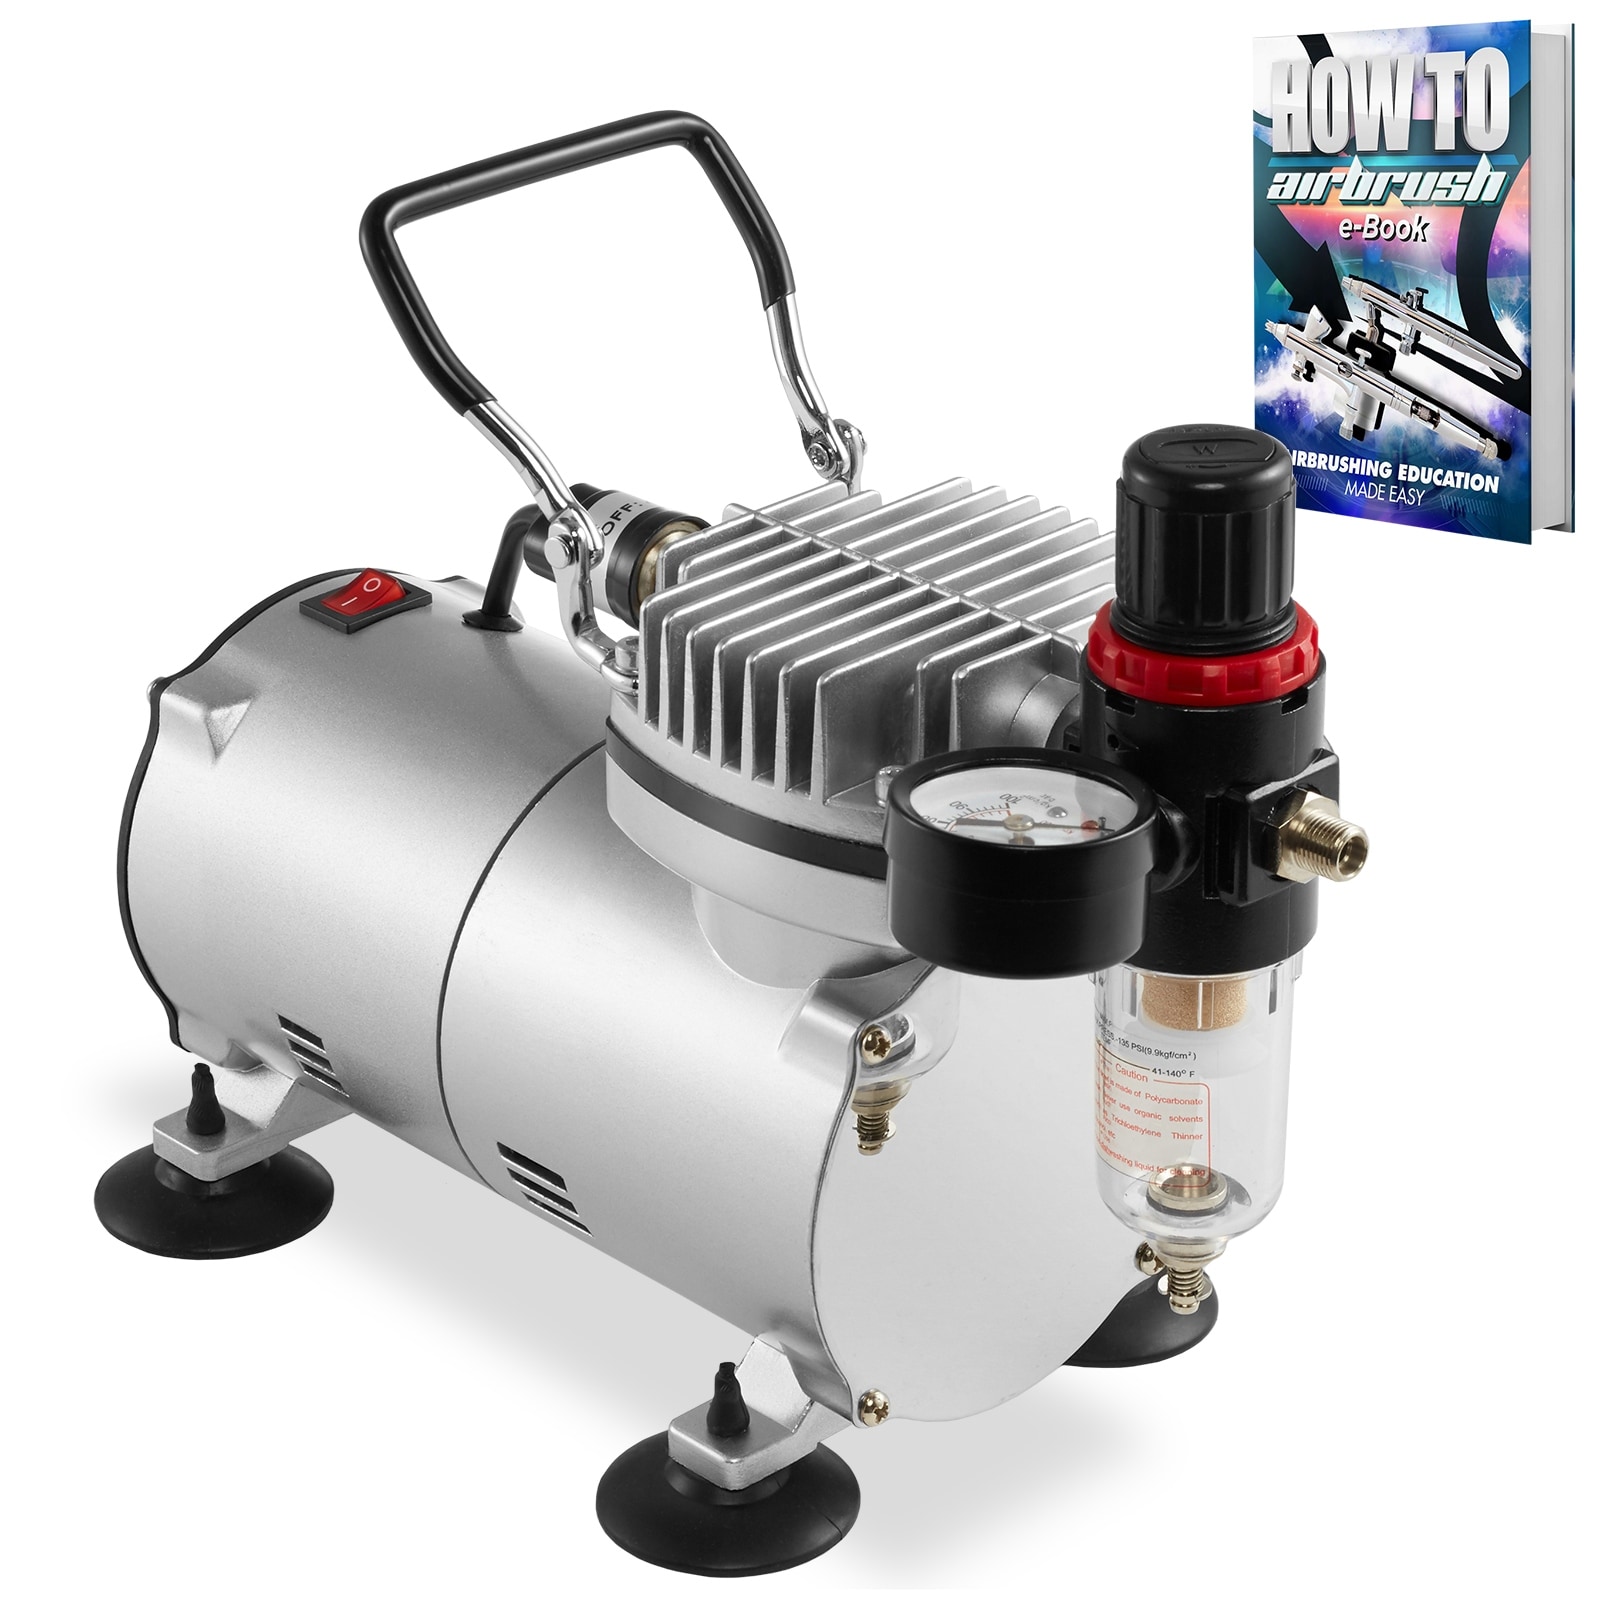 Master Airbrush Compressor (like New) PRICE IS NOT